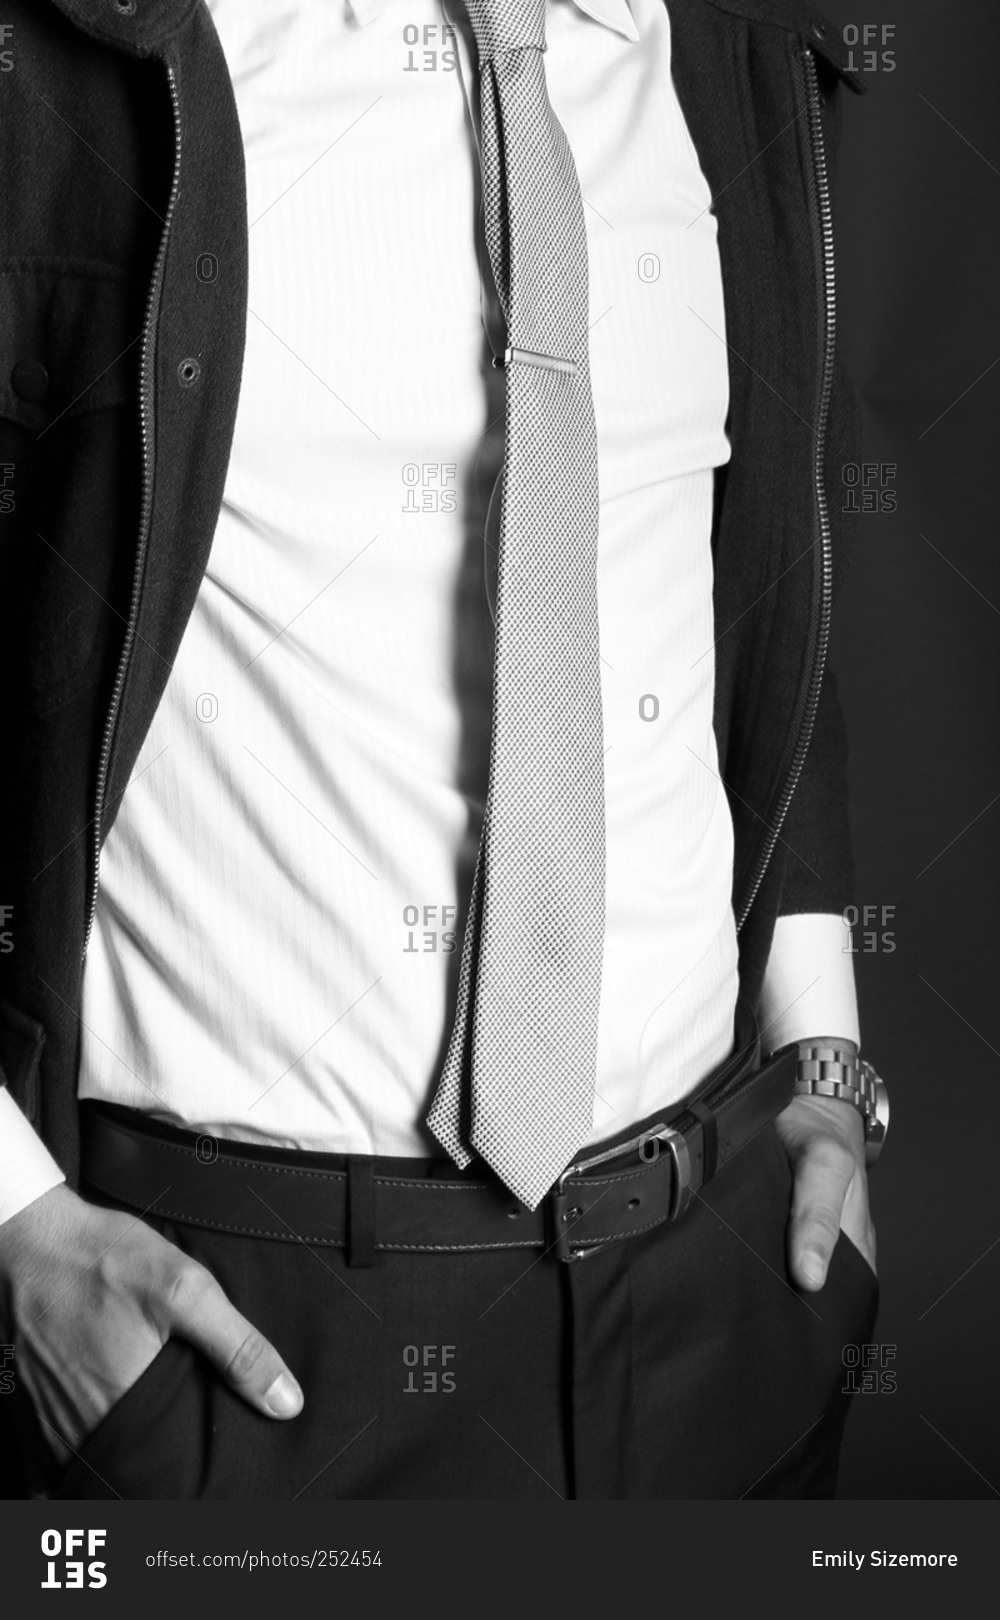 Fashion shot of man wearing a zip jacket with white shirt, tie, and black pants